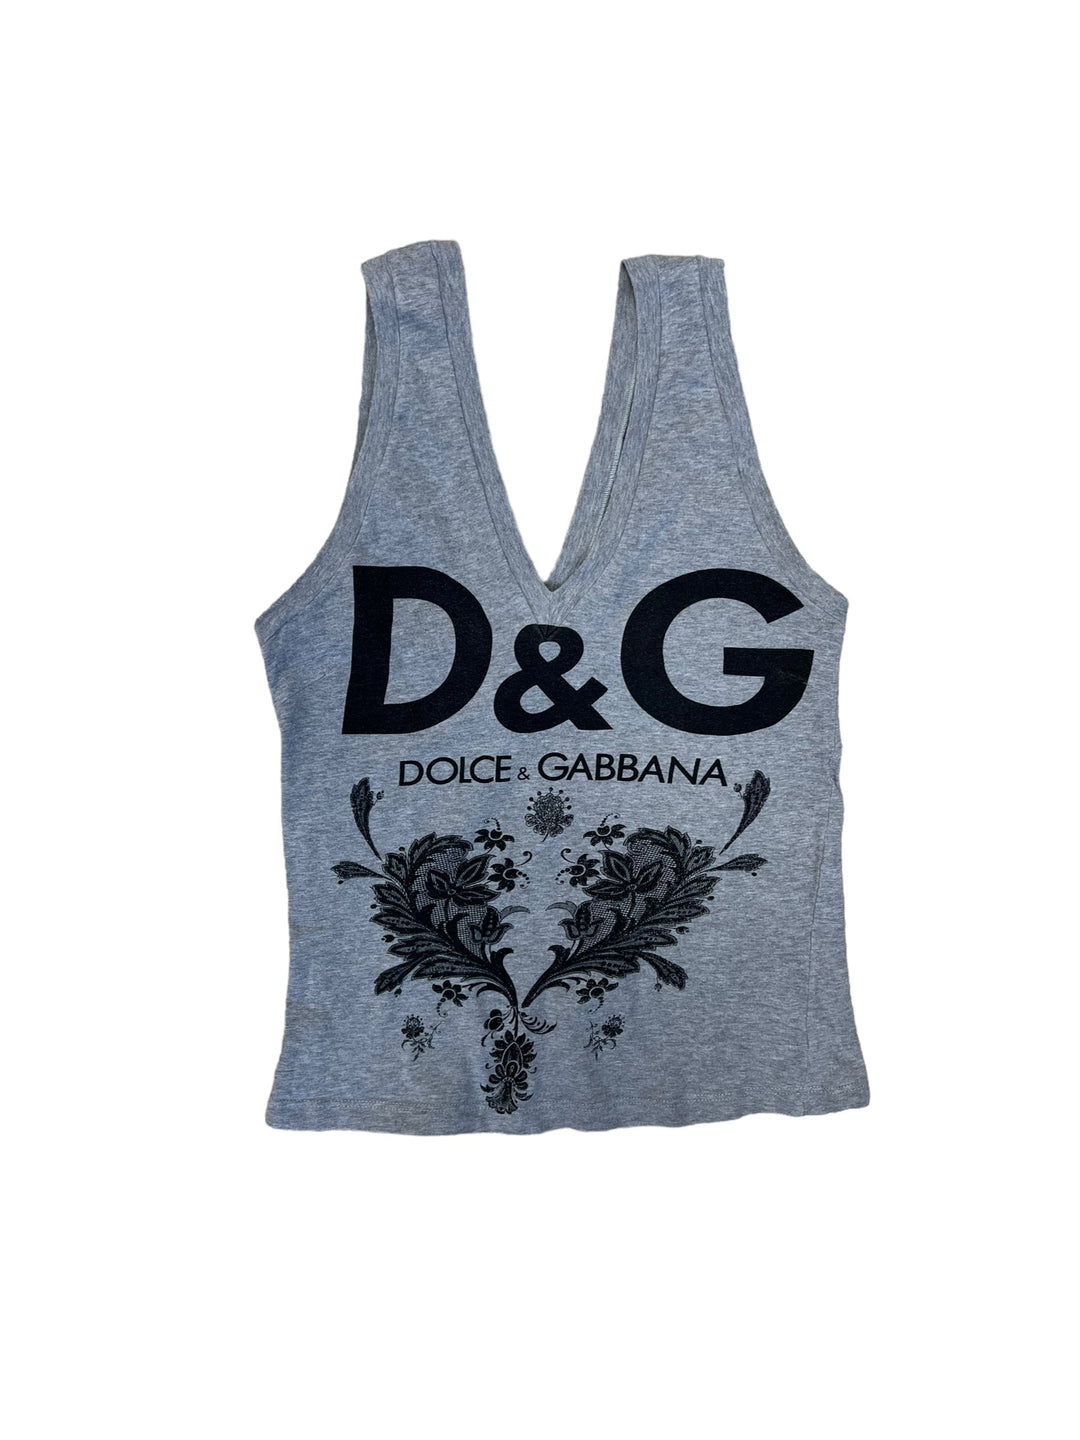 Dolce & Gabbana vintage tank top women’s extra small